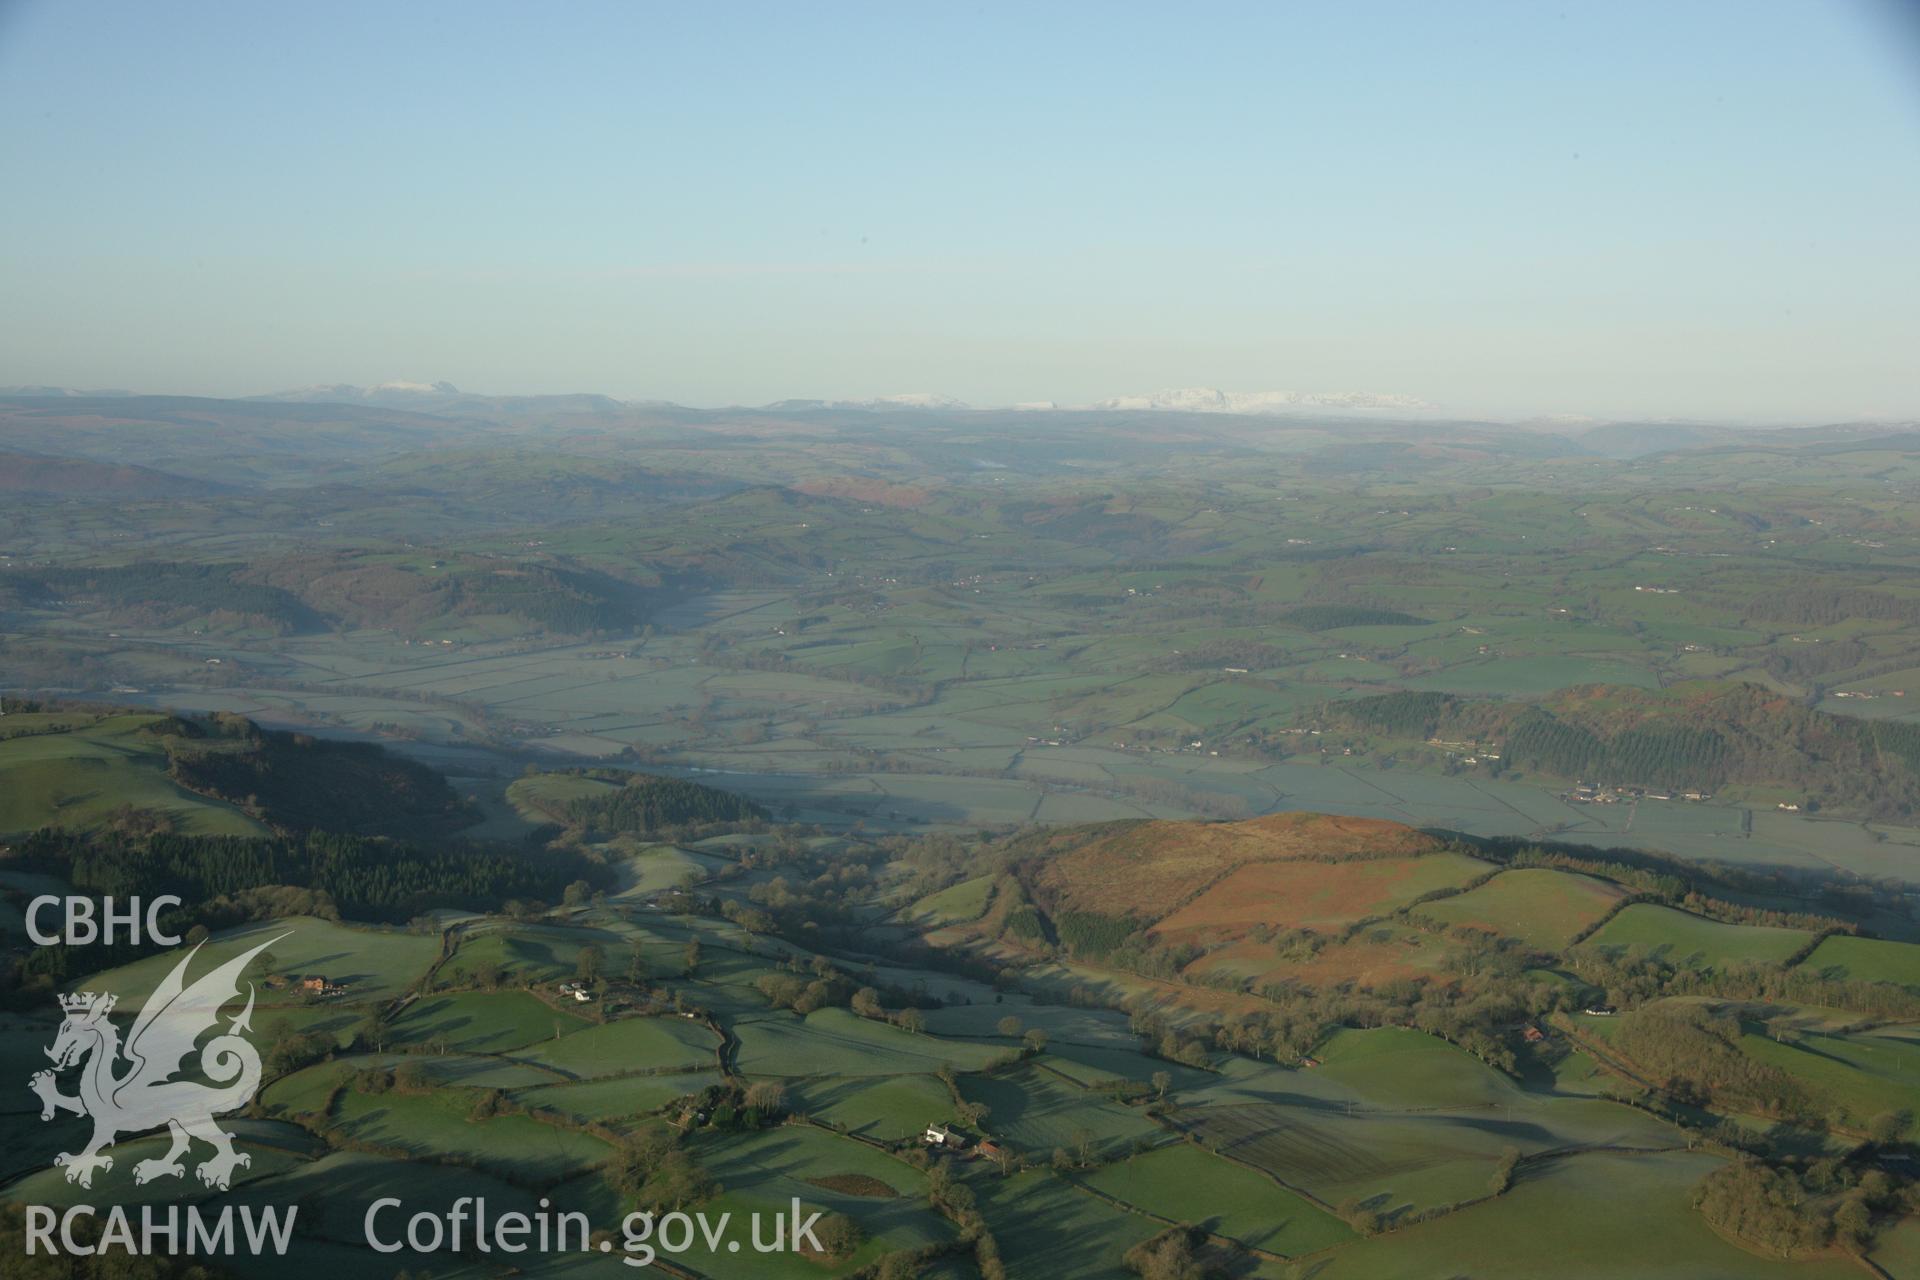 RCAHMW colour oblique aerial photograph of Meifod in landscape view. Taken on 25 January 2007 by Toby Driver